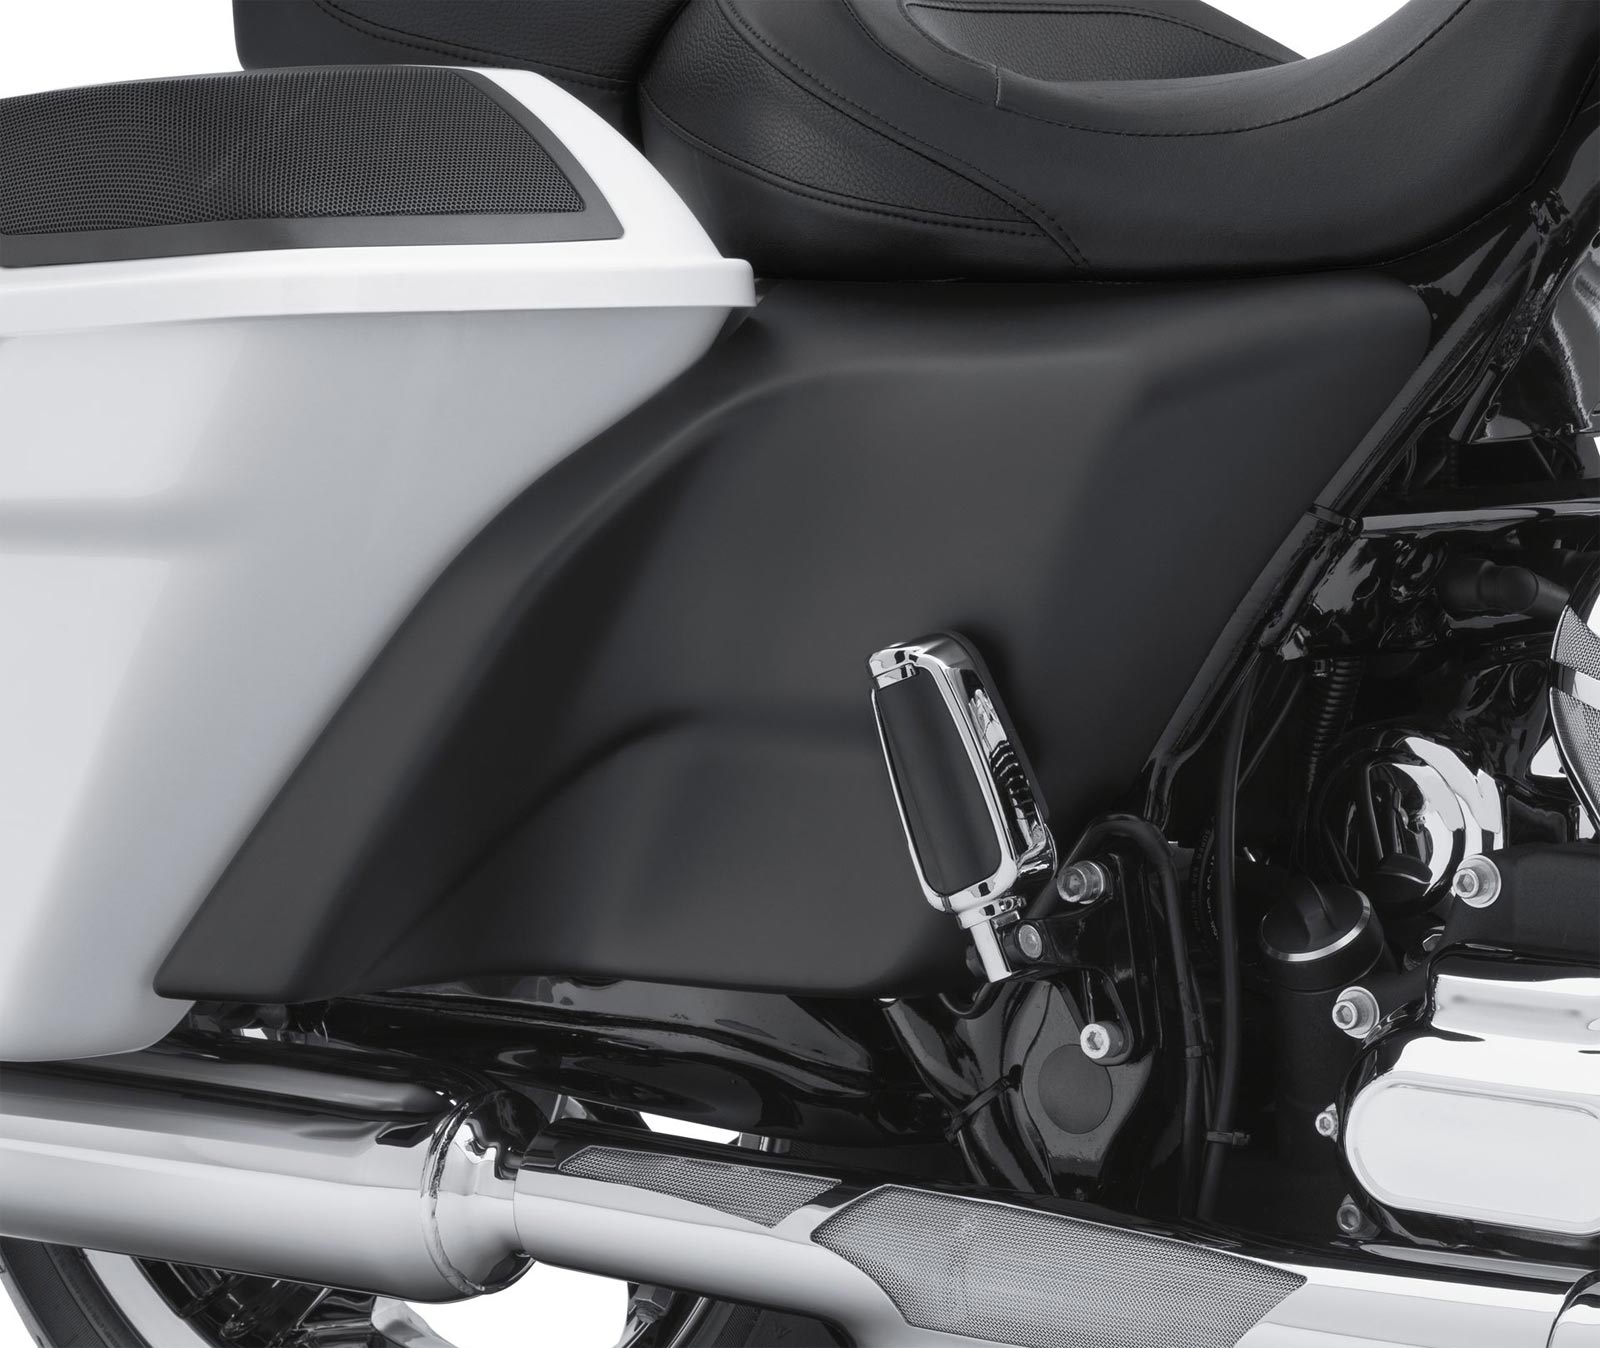 61300671v Custom Stretched Side Covers At Thunderbike Shop